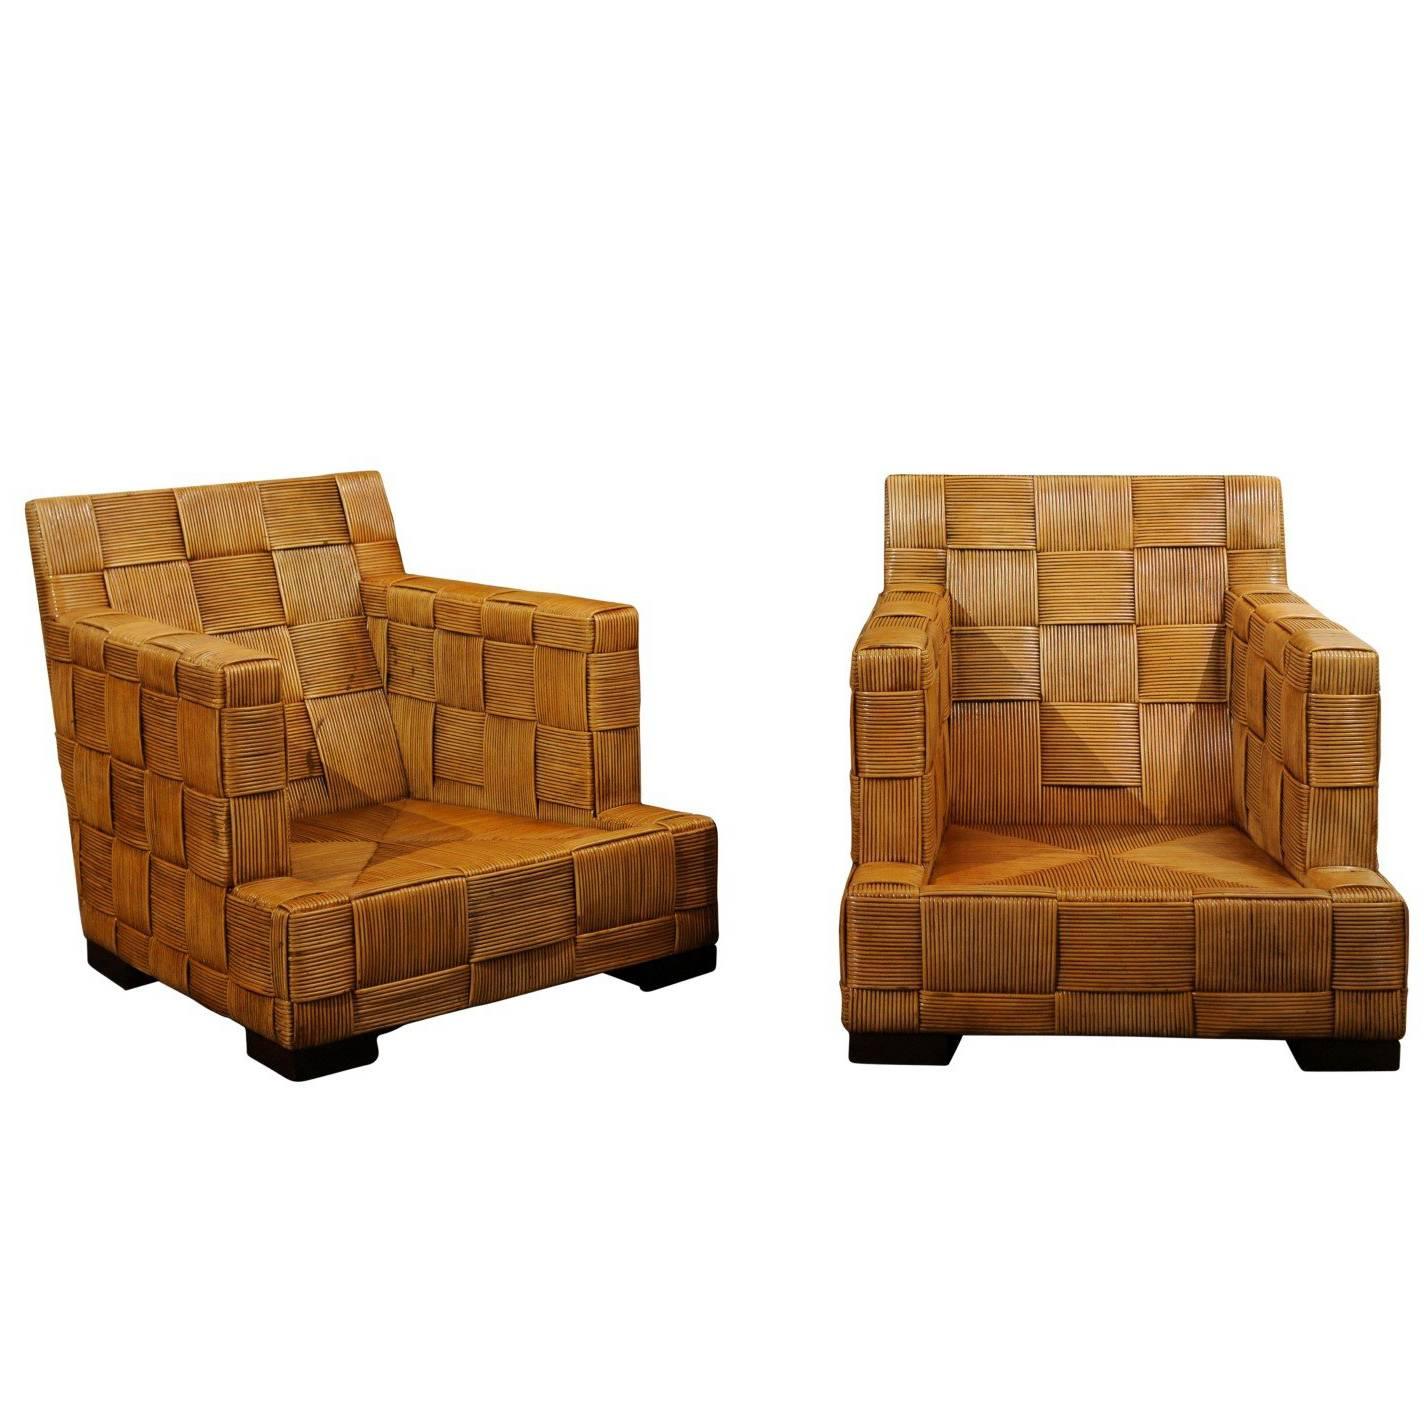 Stunning Pair of Block Island Club Chairs by John Hutton for Donghia